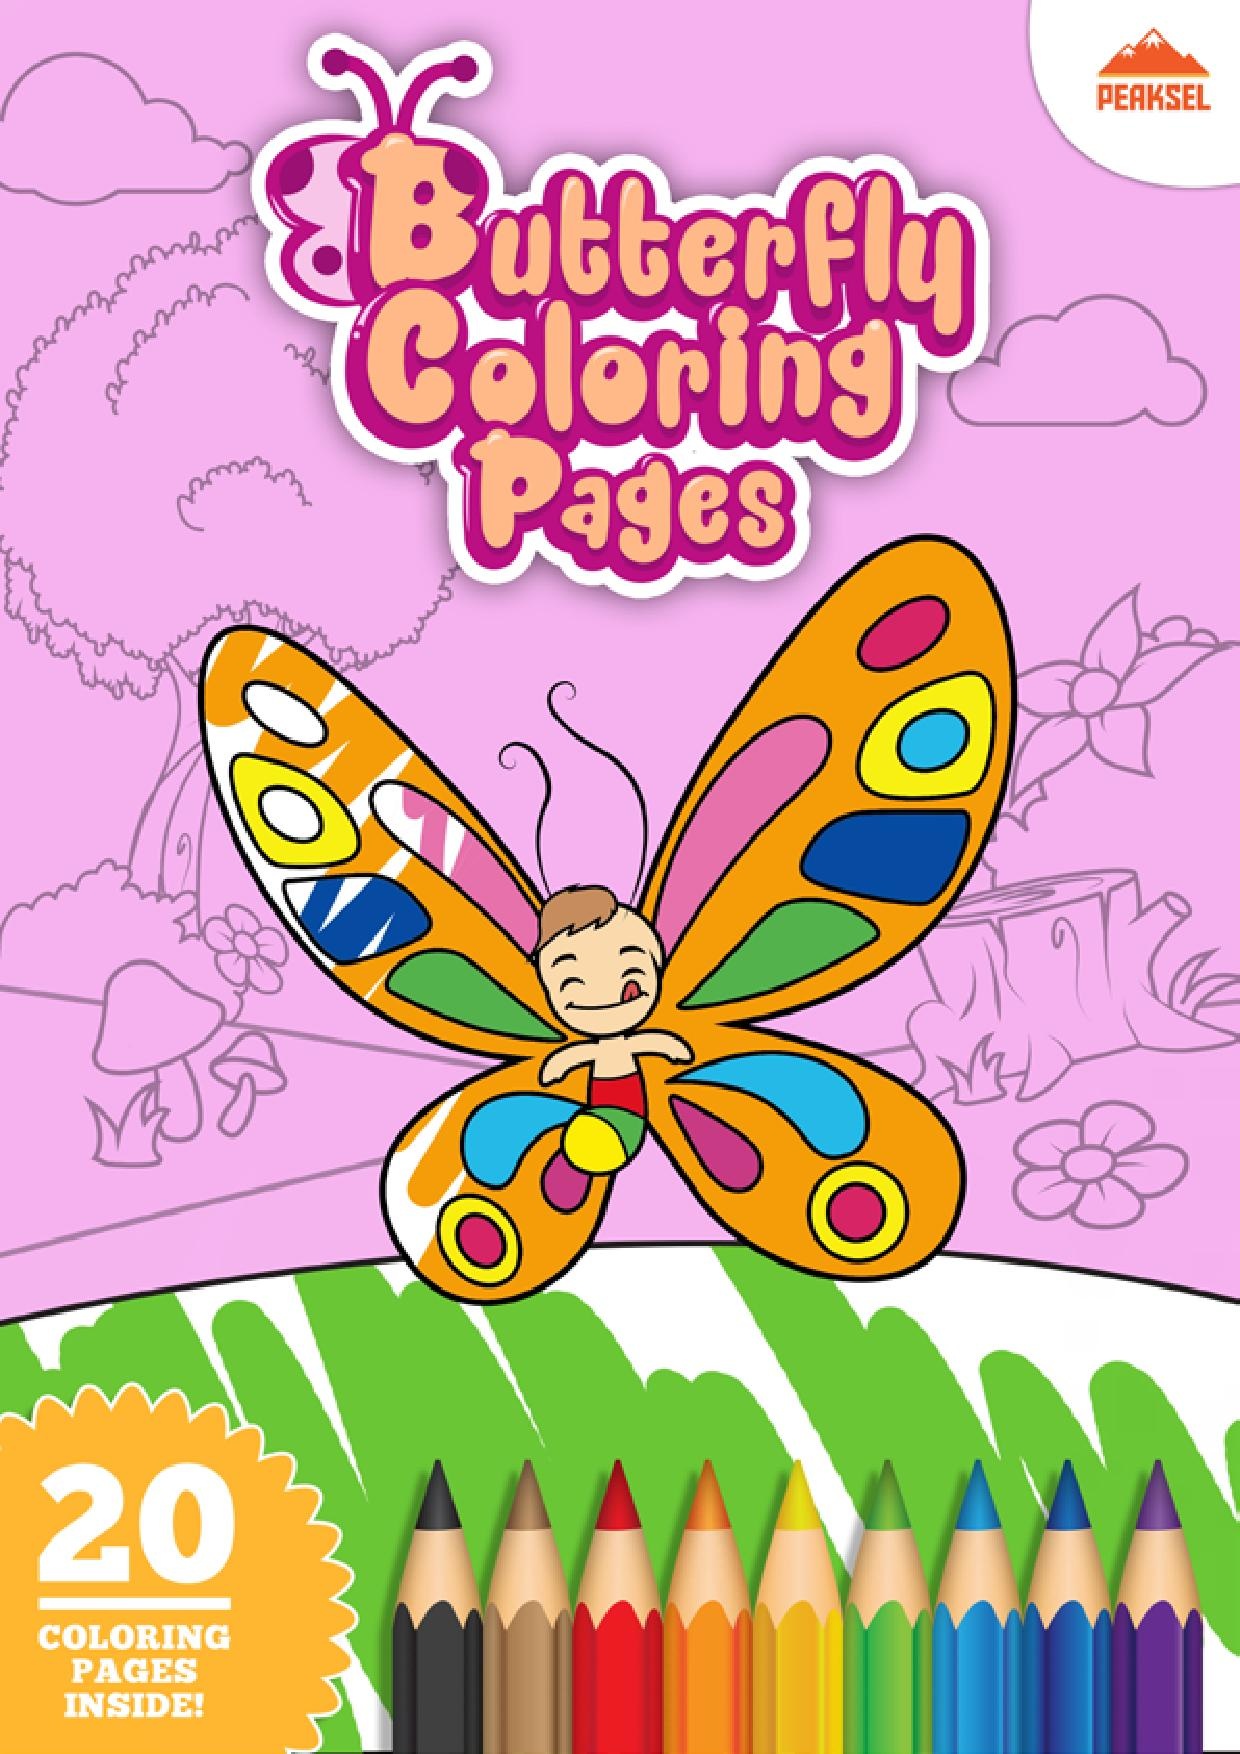 File Butterfly Coloring Pages Printable Coloring Book For Kids Pdf Wikimedia Commons